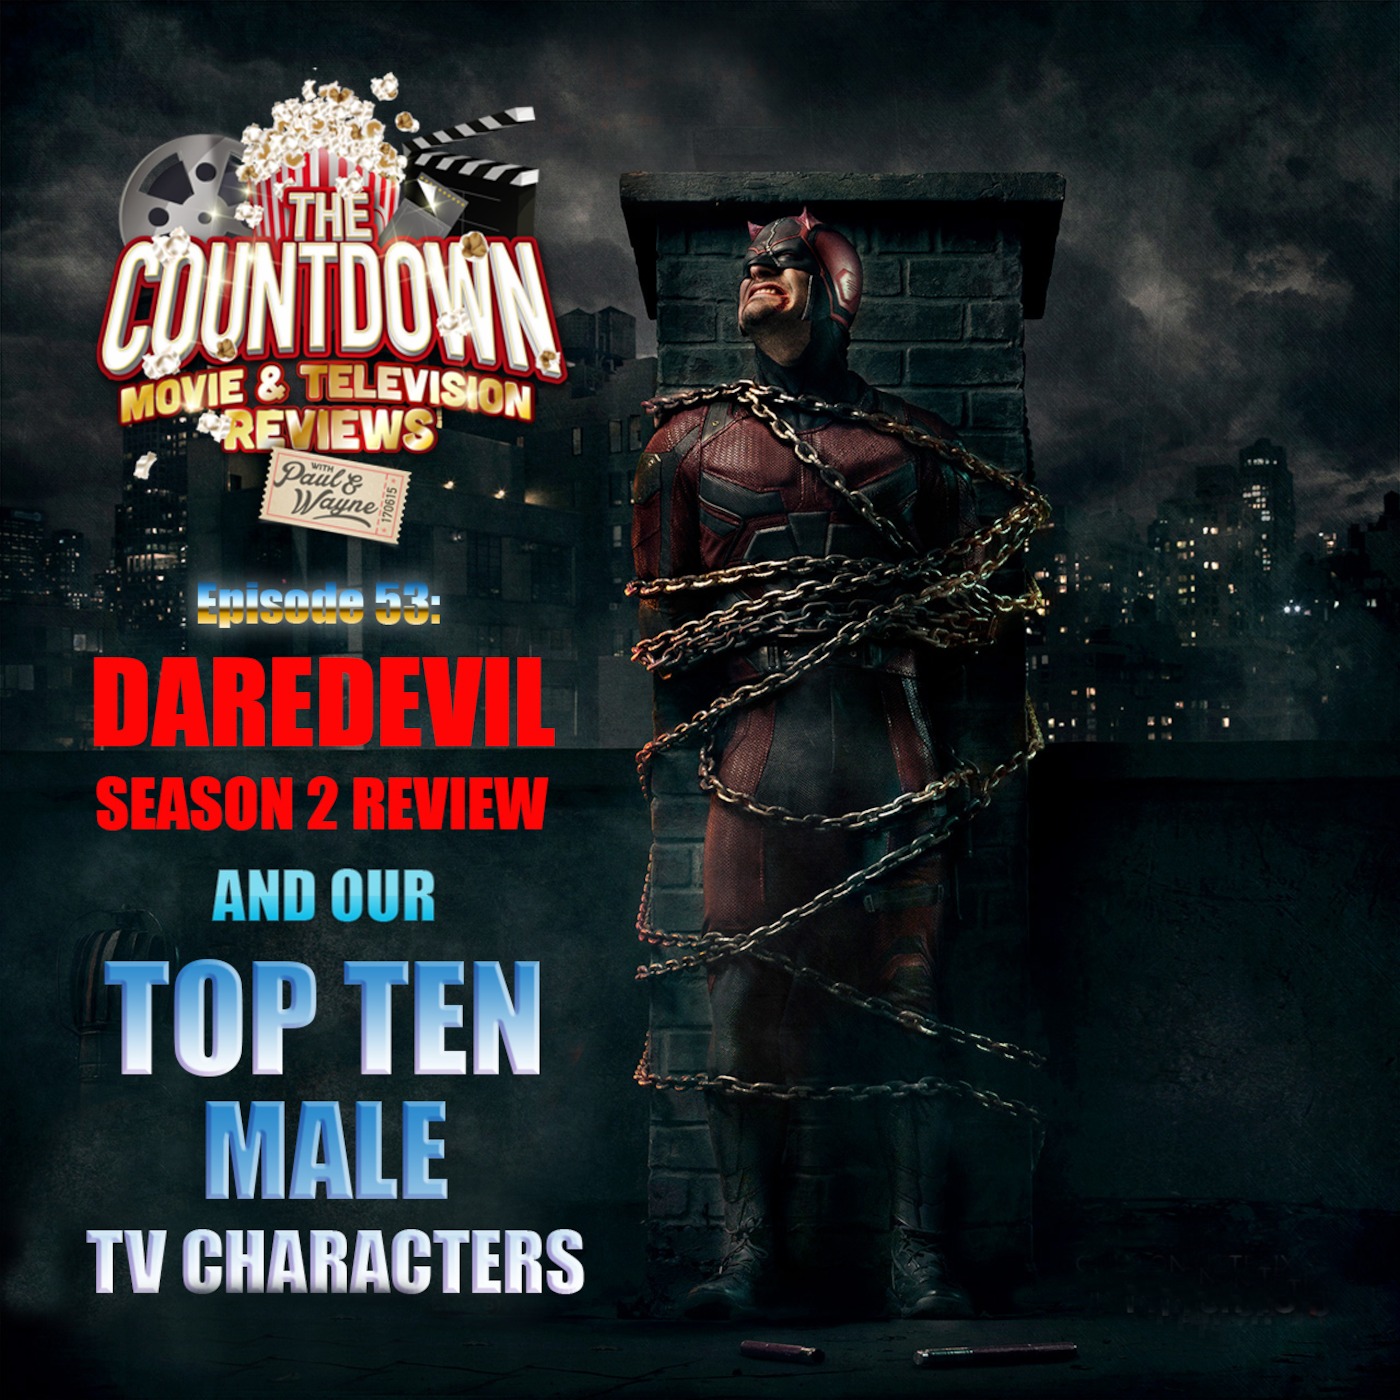 Episode 53: Daredevil S2 review & Top 10 Male TV Characters